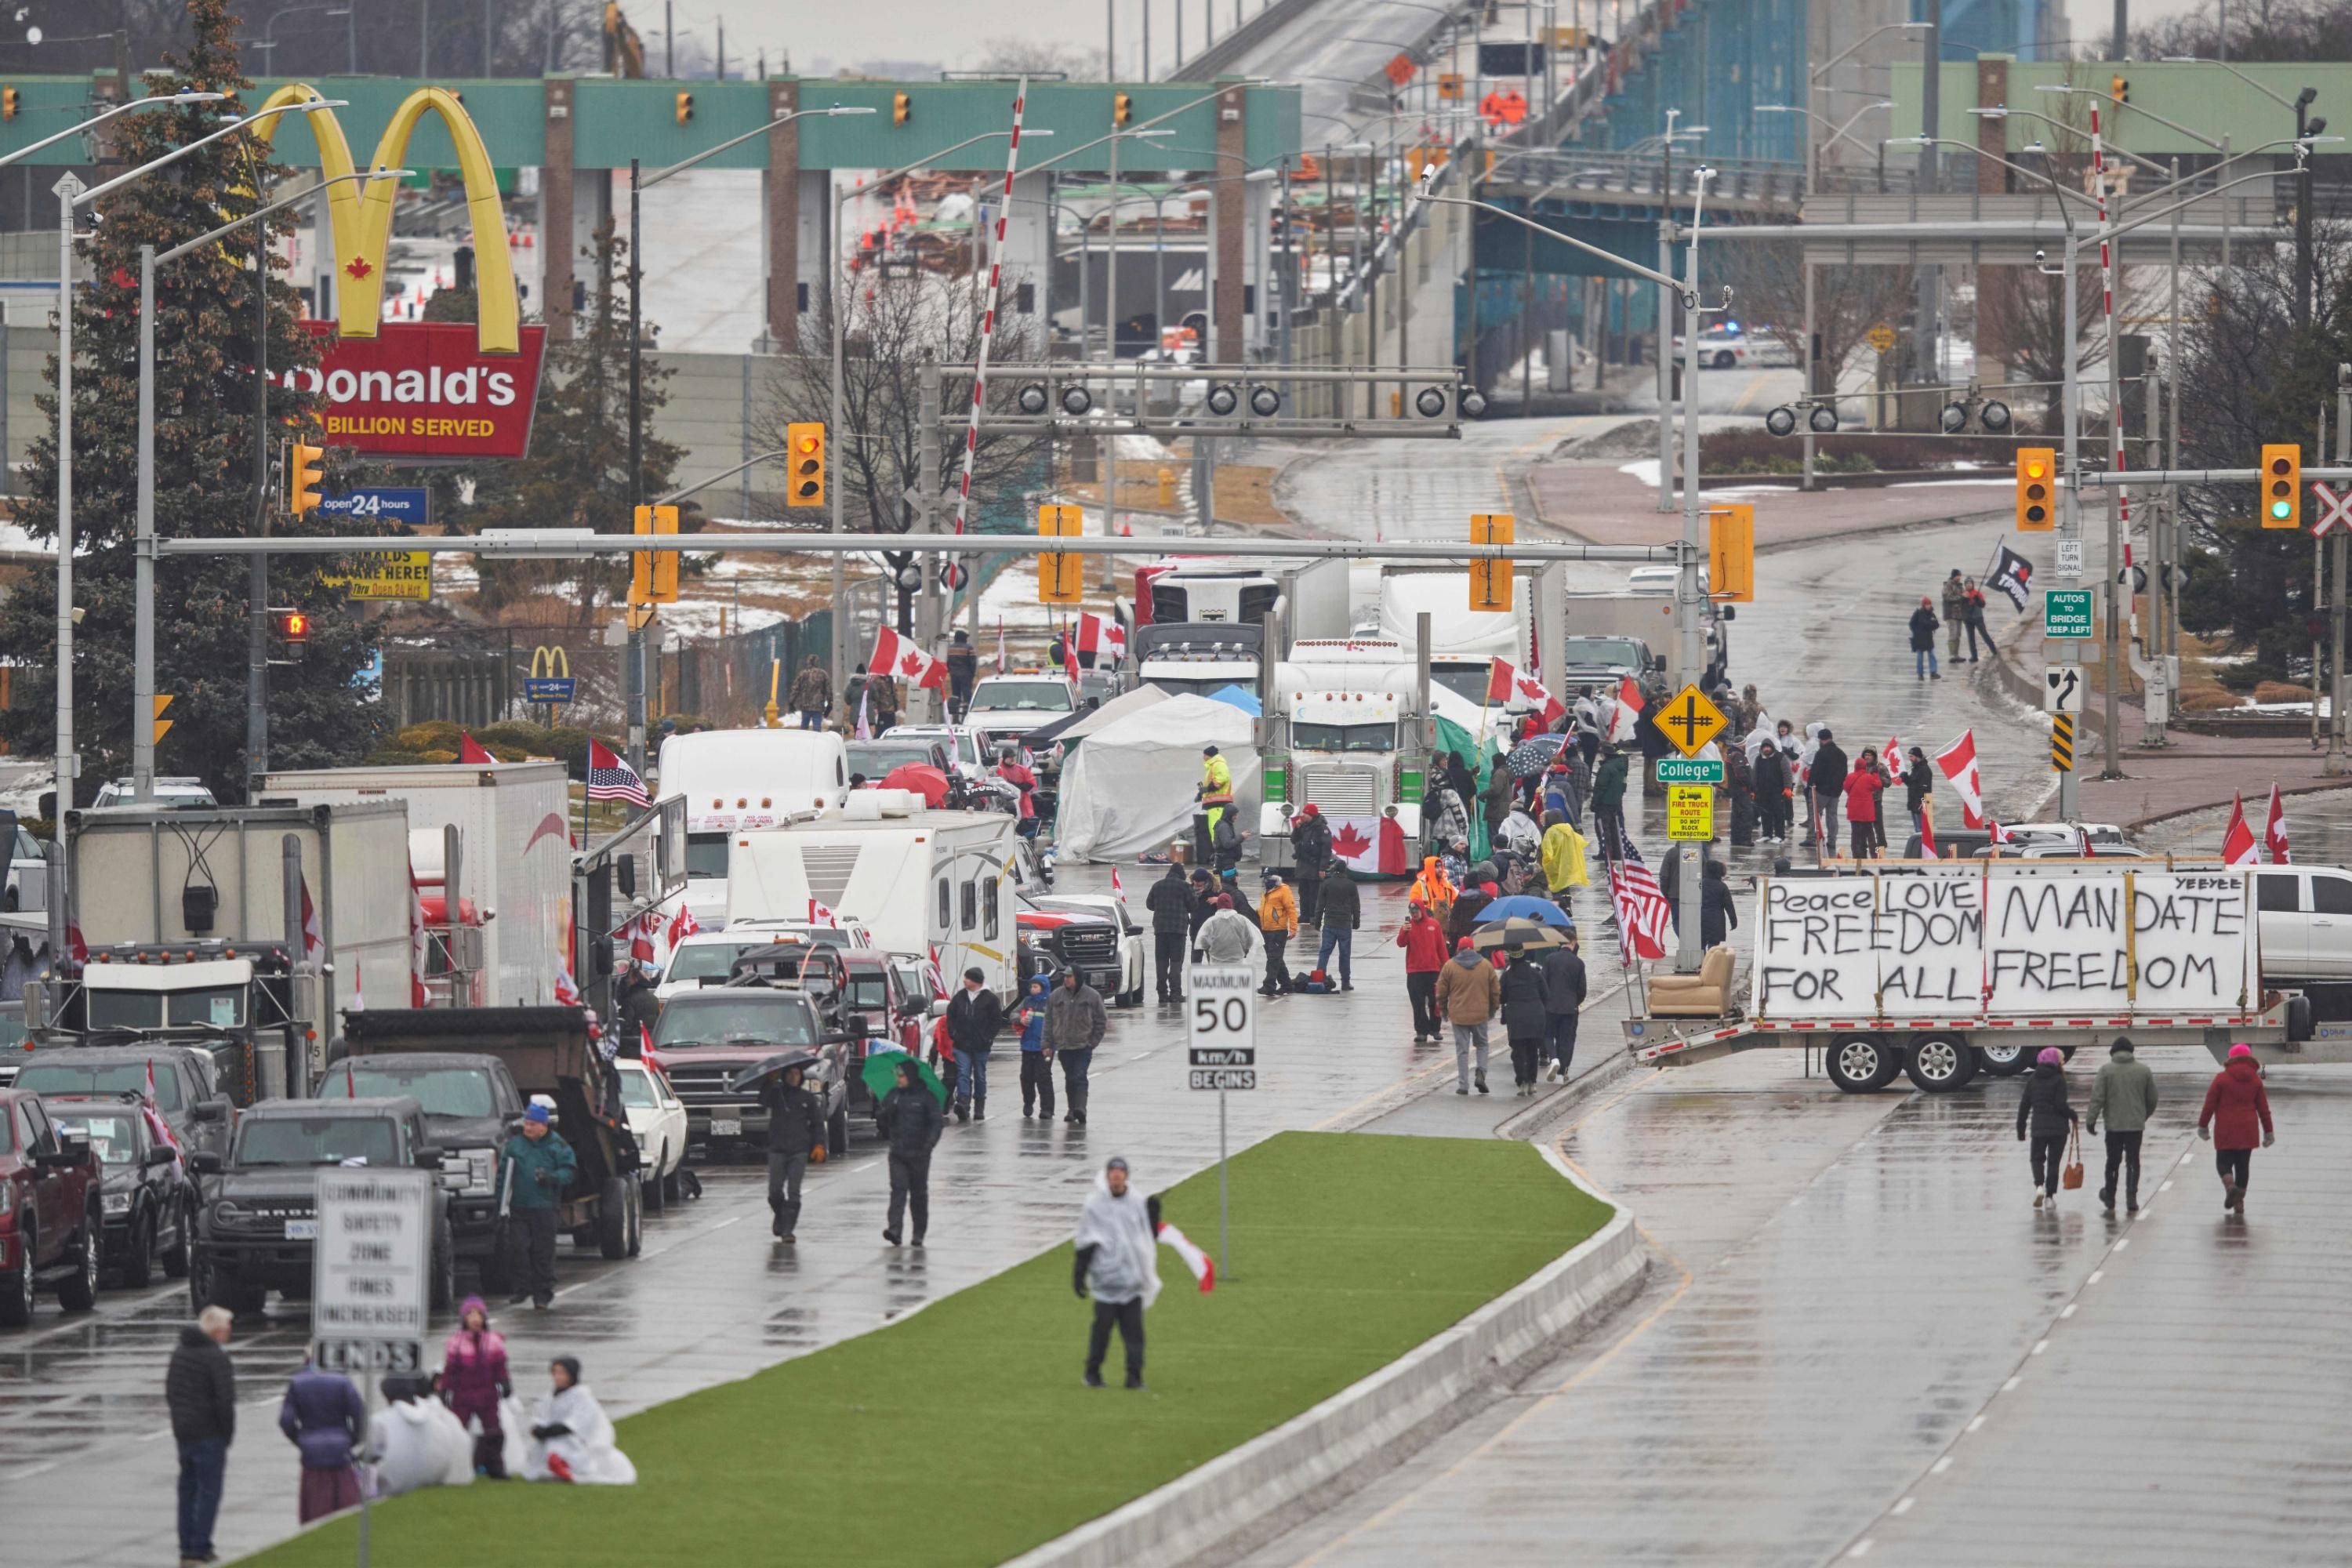 Protesters shutting down bridge between Canada and the US